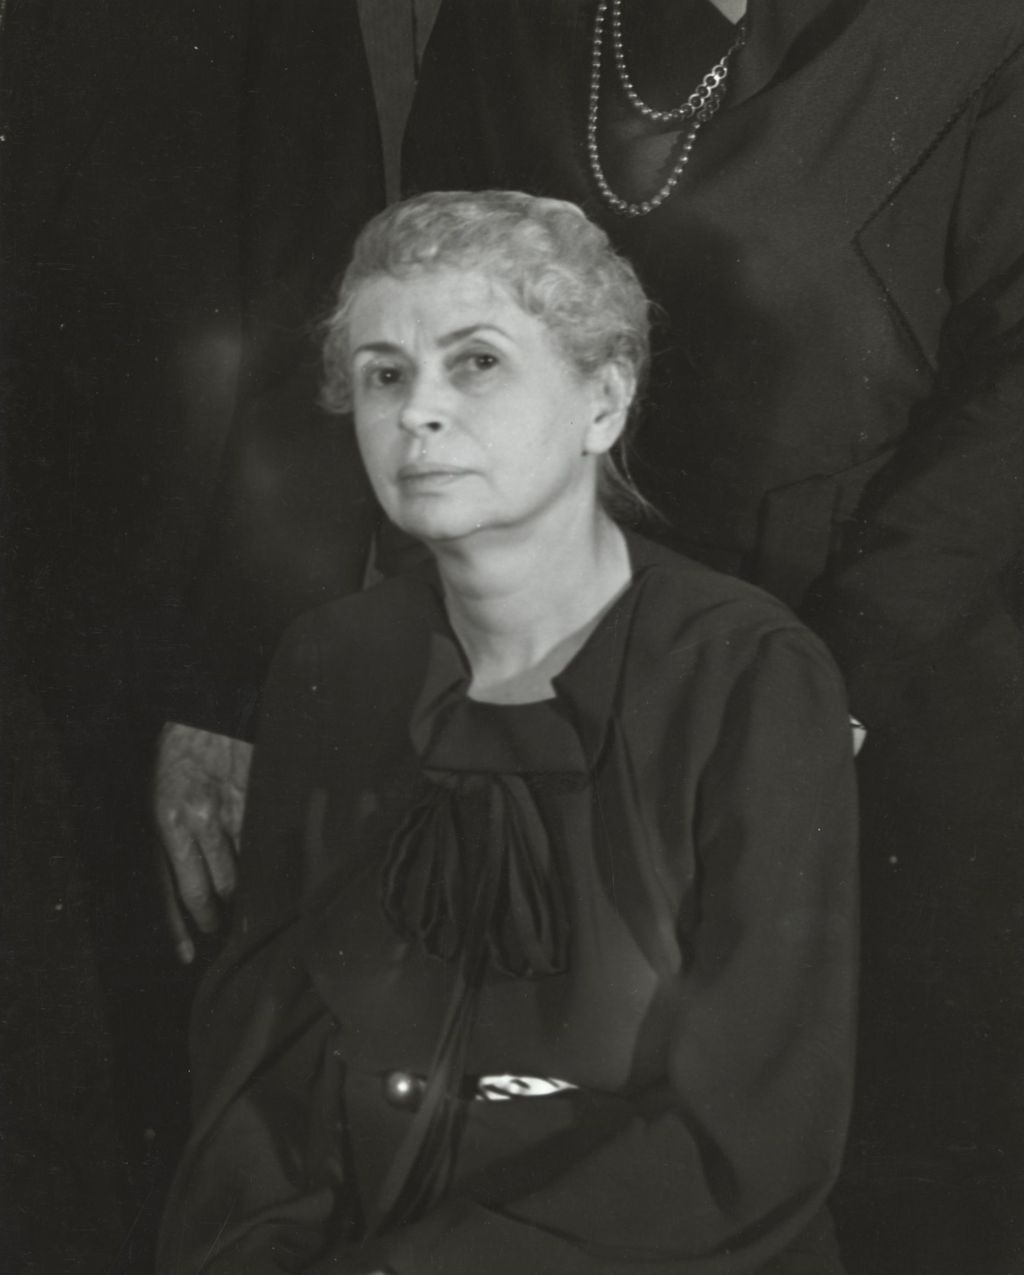 Hull-House resident and art, theater, and dance instructor Edith de Nancrede